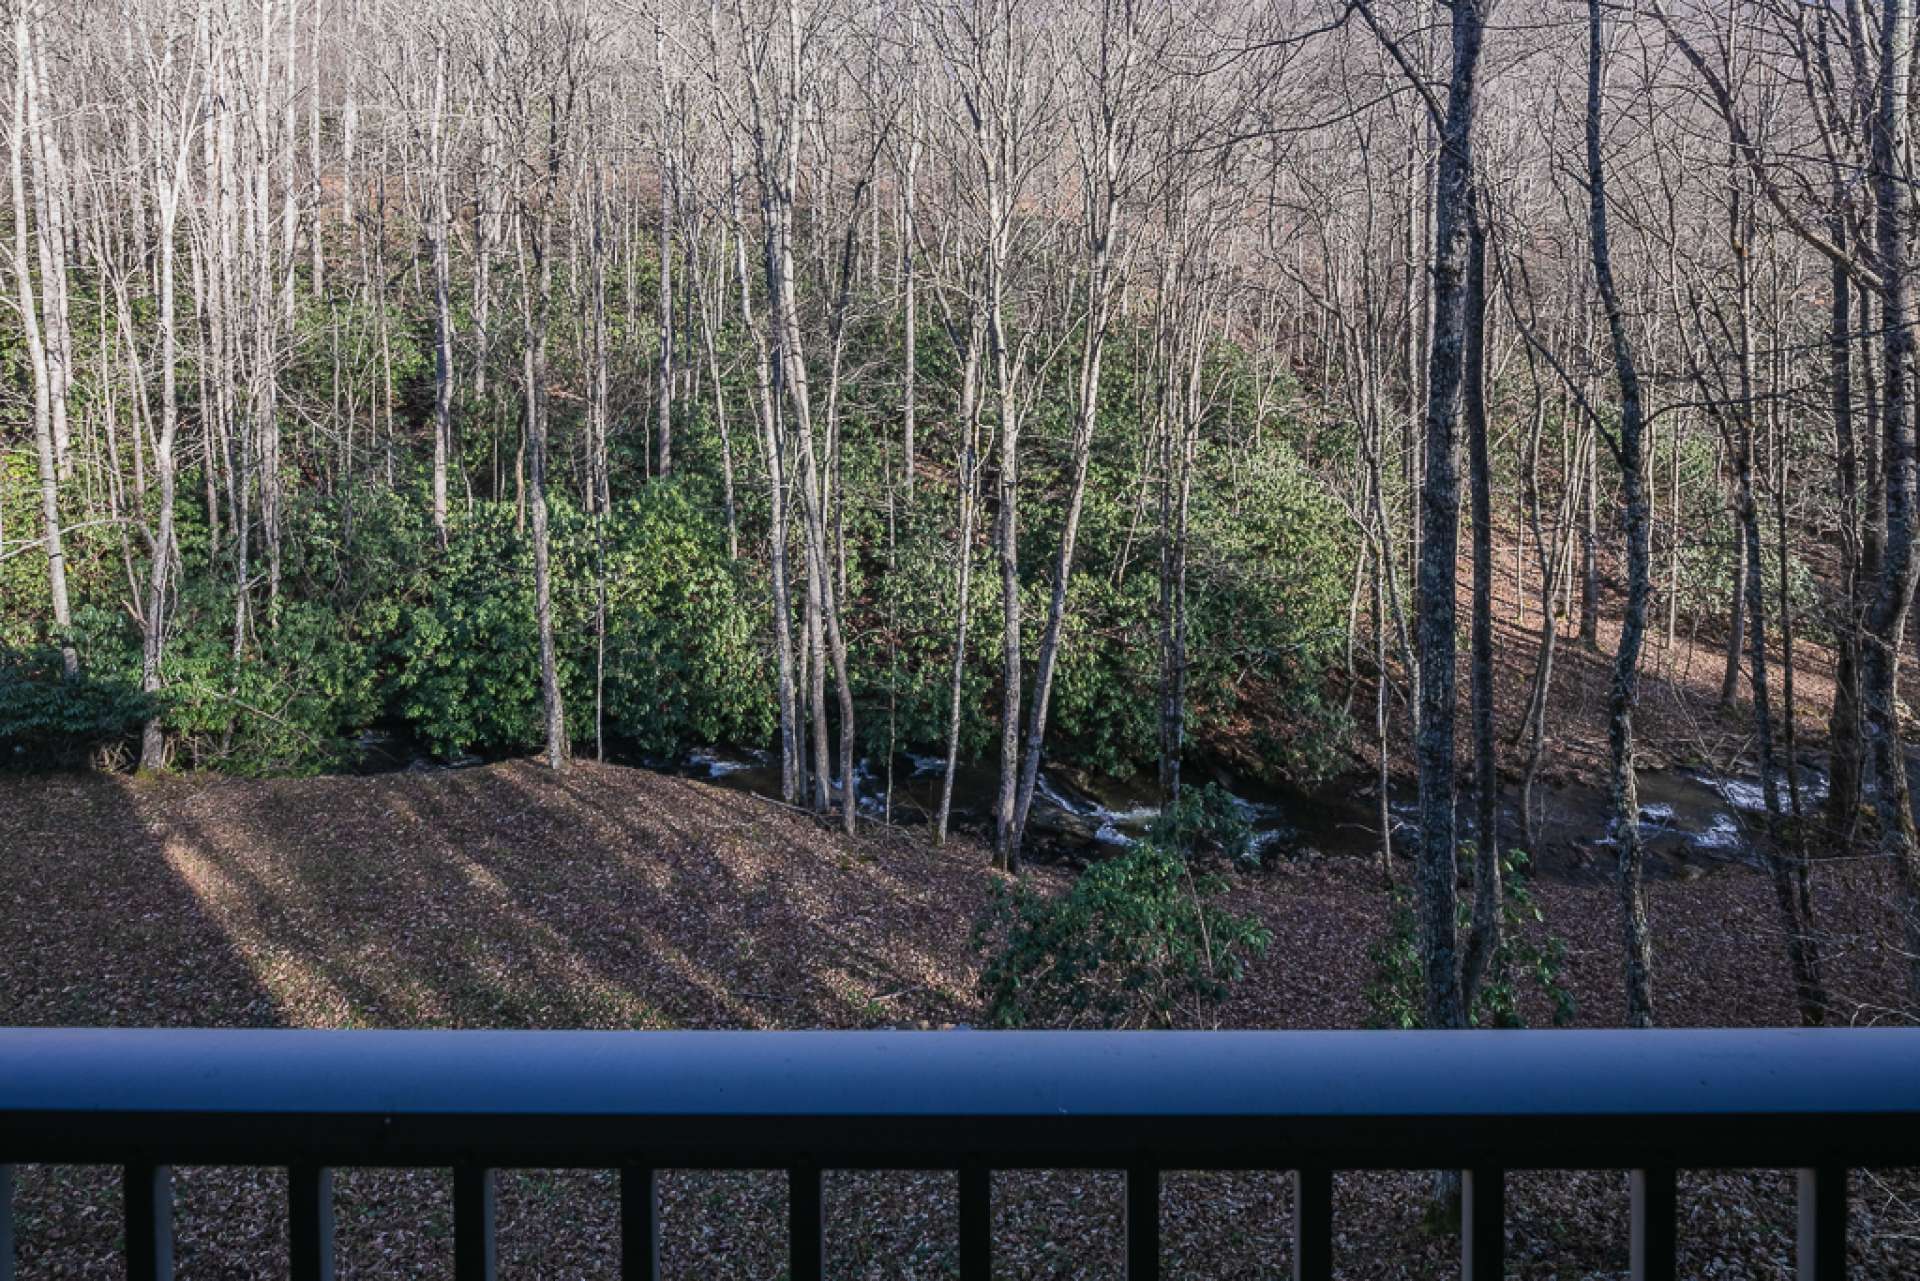 Relax on the back porch with Nature surrounding you and the sounds of the rushing creek below.